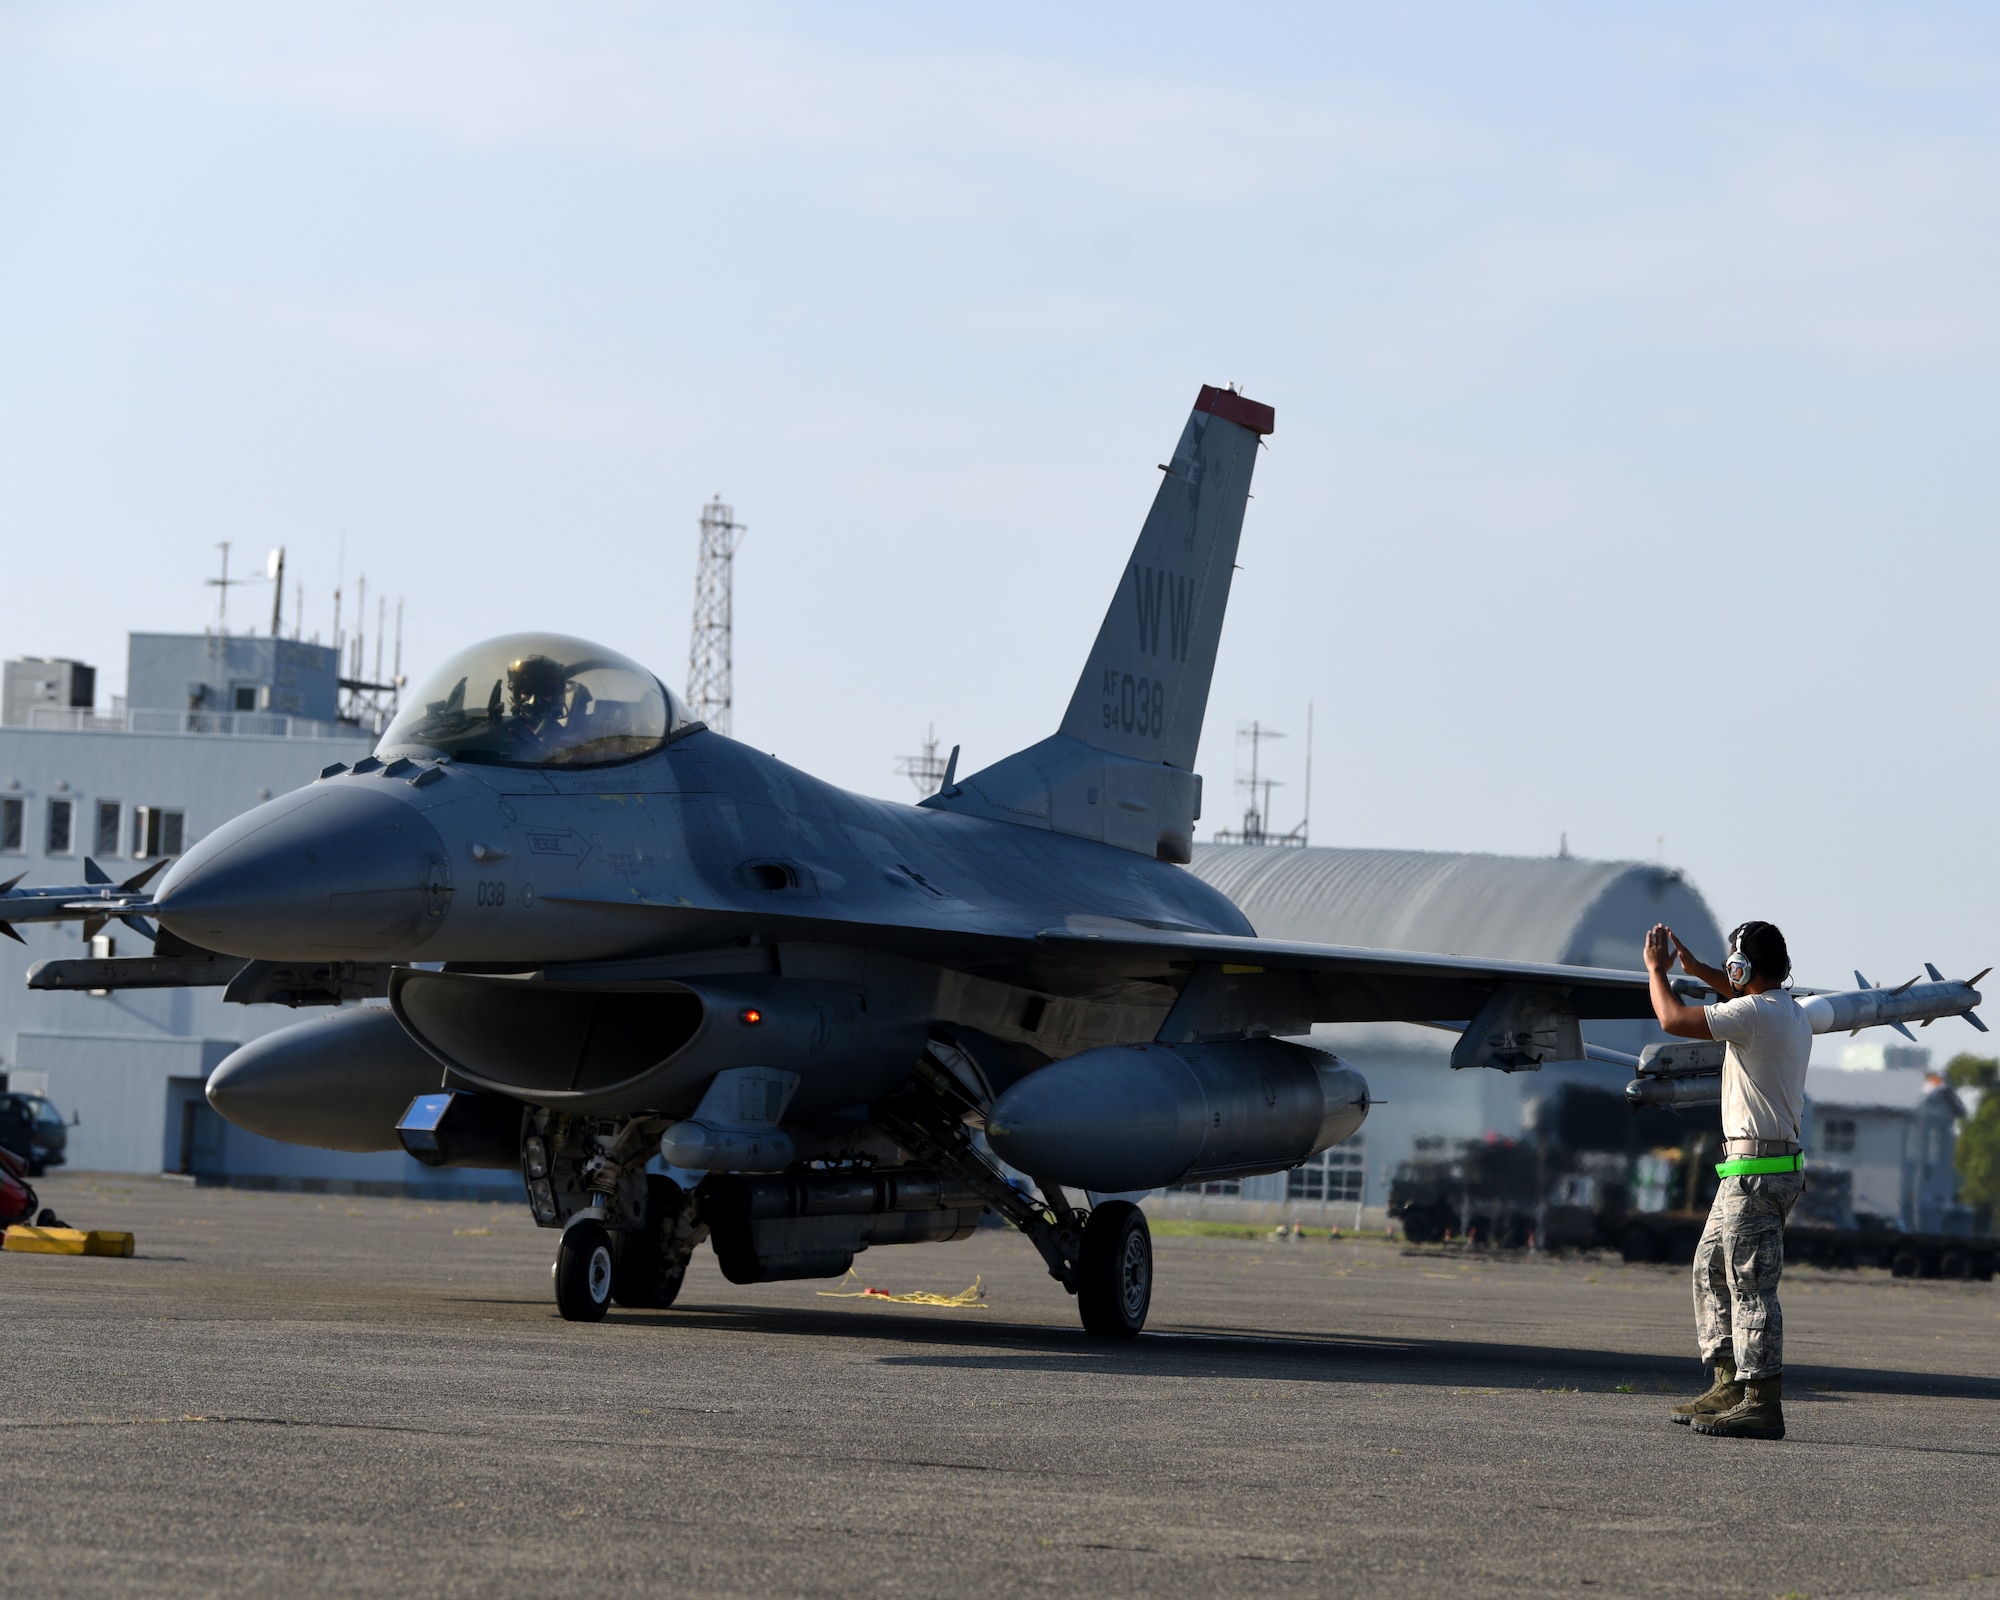 An F-16 Fighting Falcon prepares for takeoff during Aviation Training Relocation at Chitose Air Base, Japan Aug. 27, 2020.